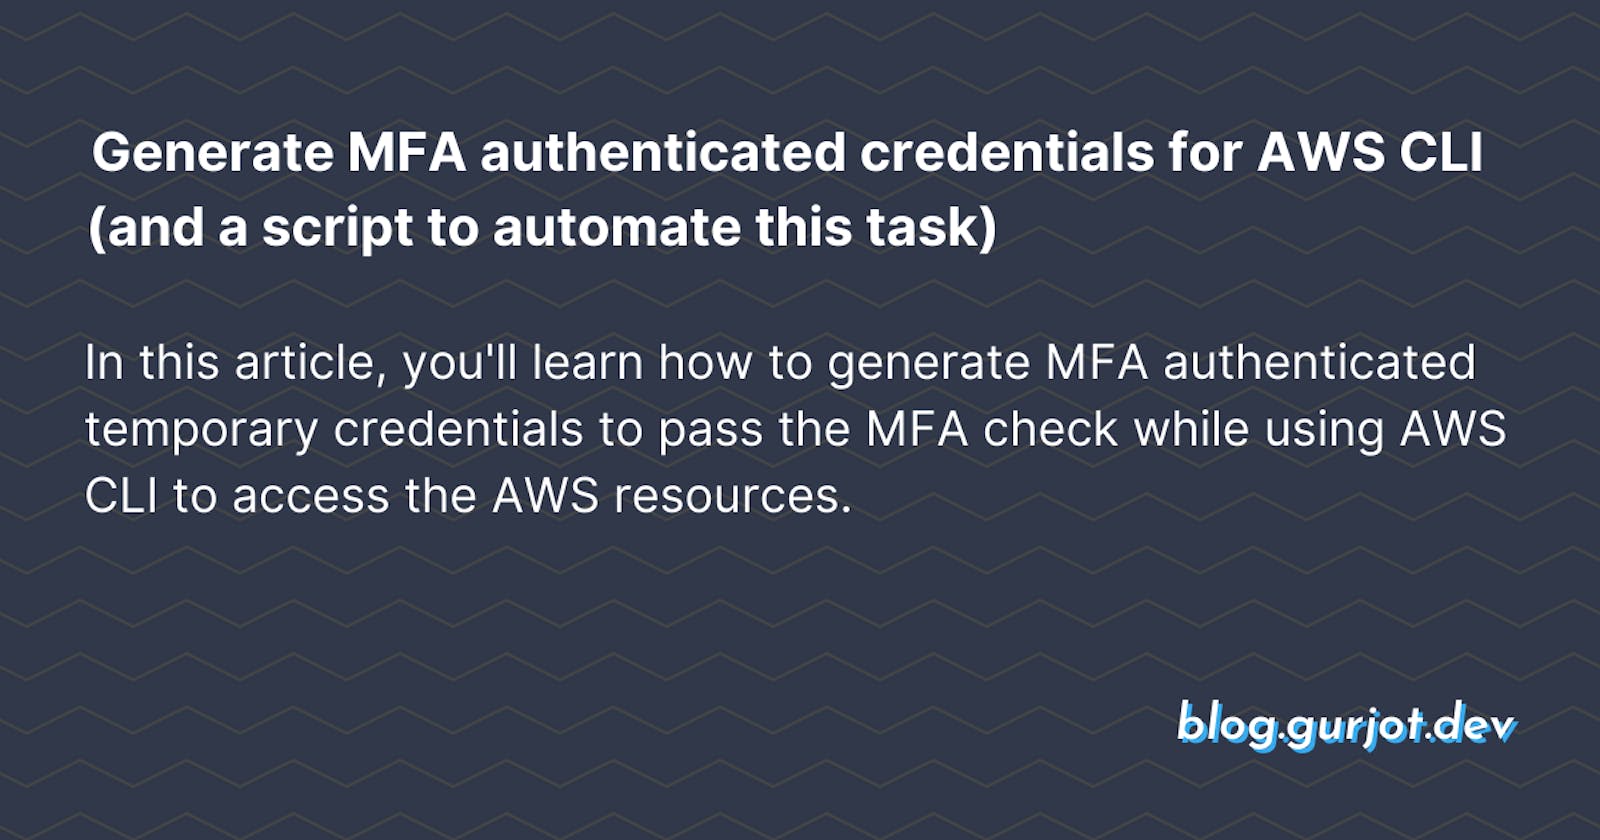 Generate MFA authenticated credentials for AWS CLI (and a script to automate this task)